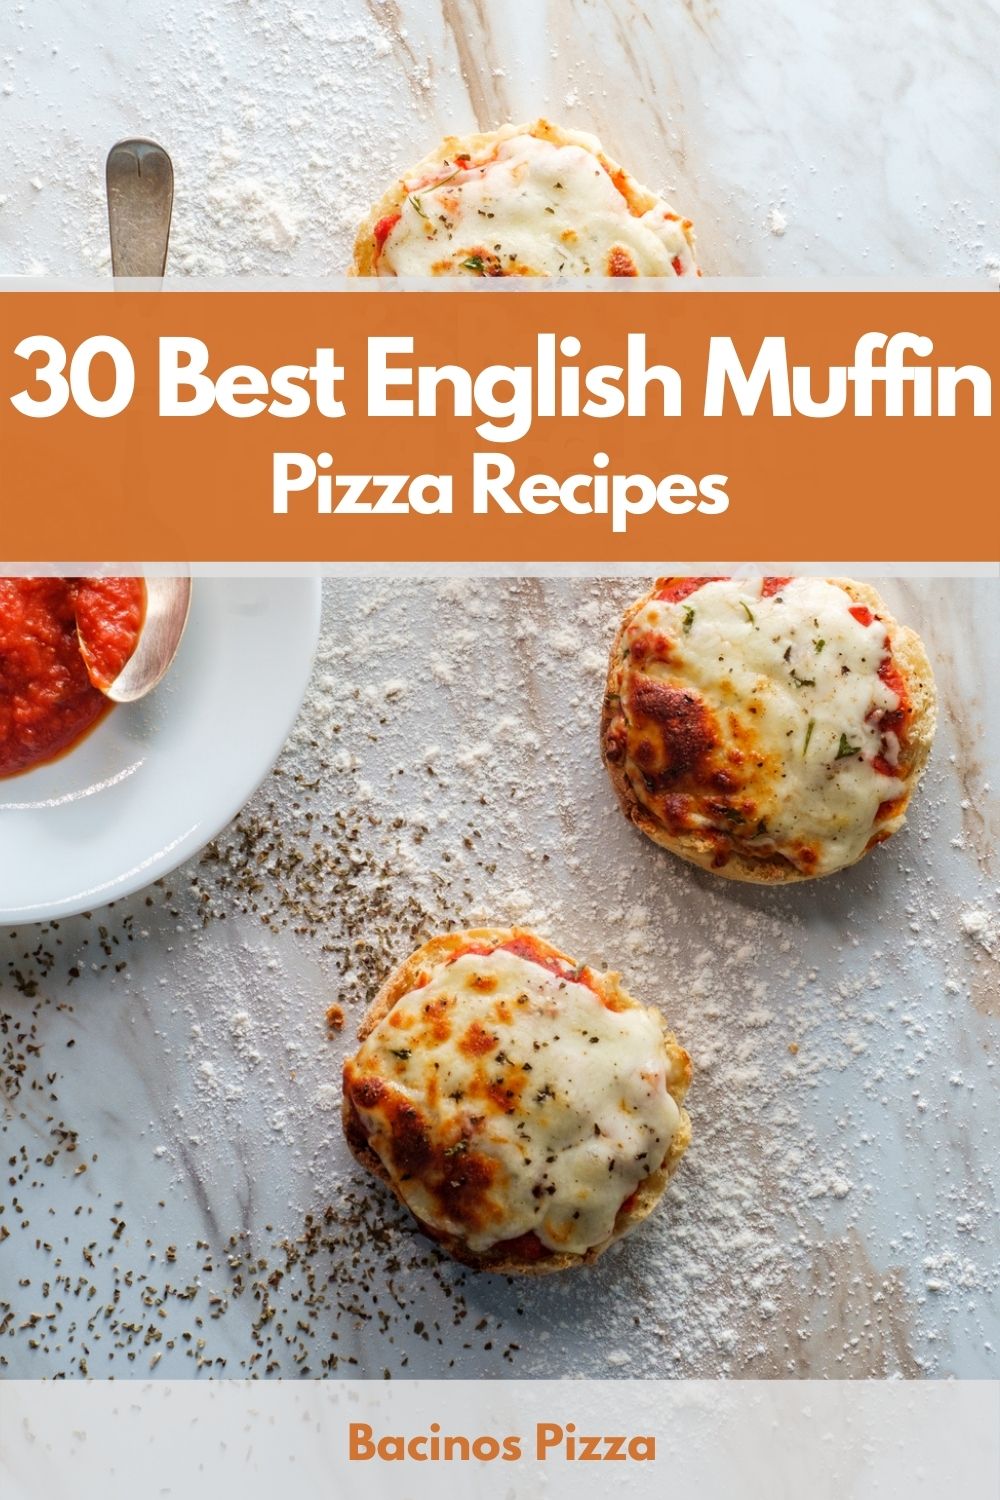 30 Best English Muffin Pizza Recipes pin